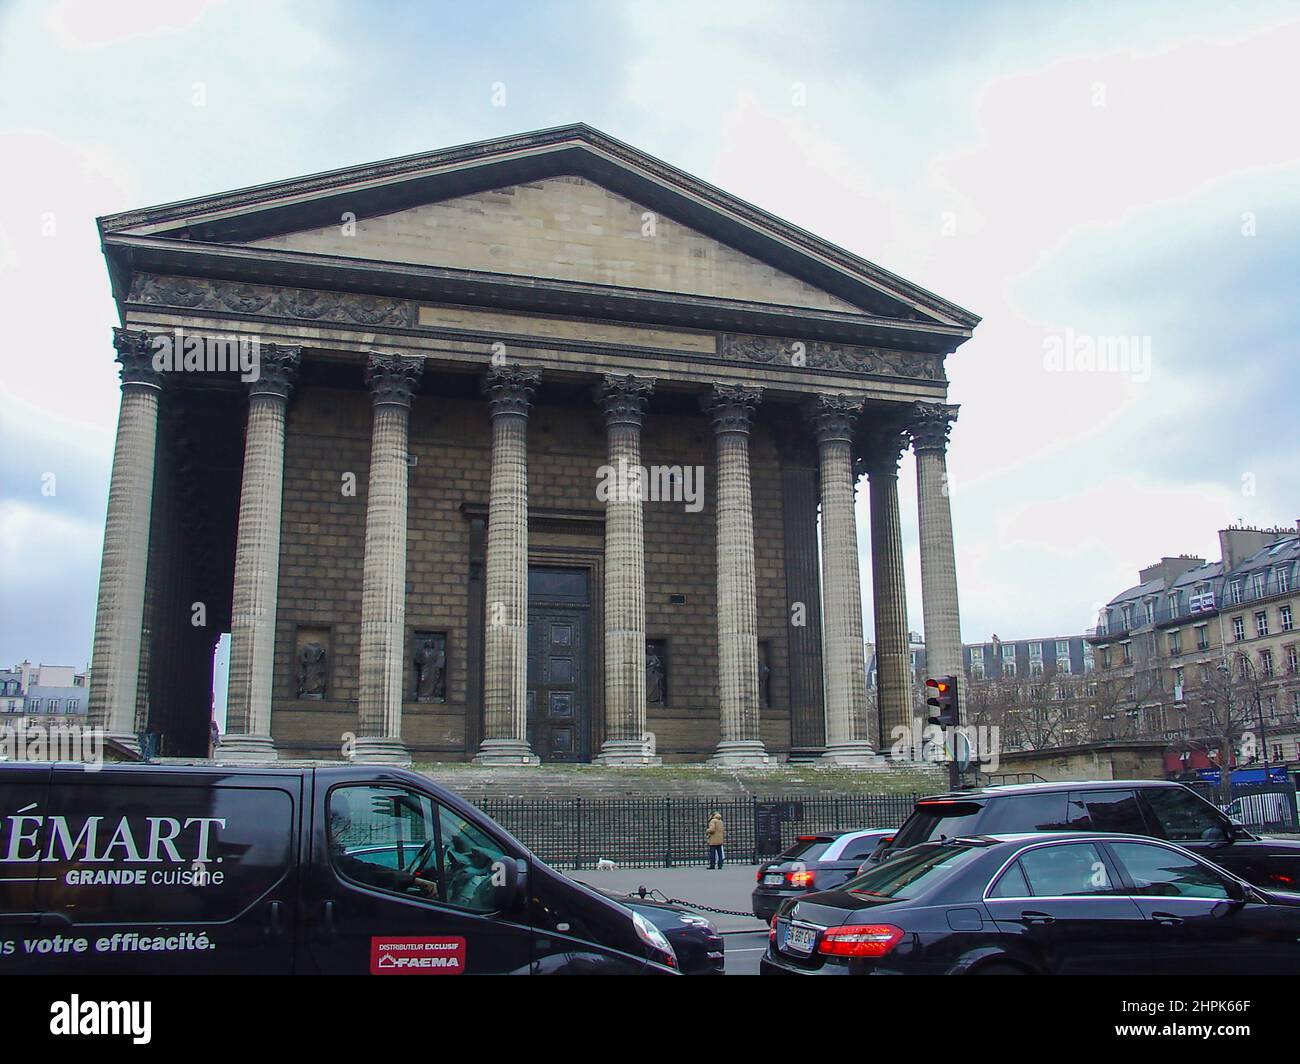 Église de la Madeleine, a Catholic church occupying a commanding position in the 8th arrondissement of Paris. Madeleine Church glory of Napoleon army. Stock Photo